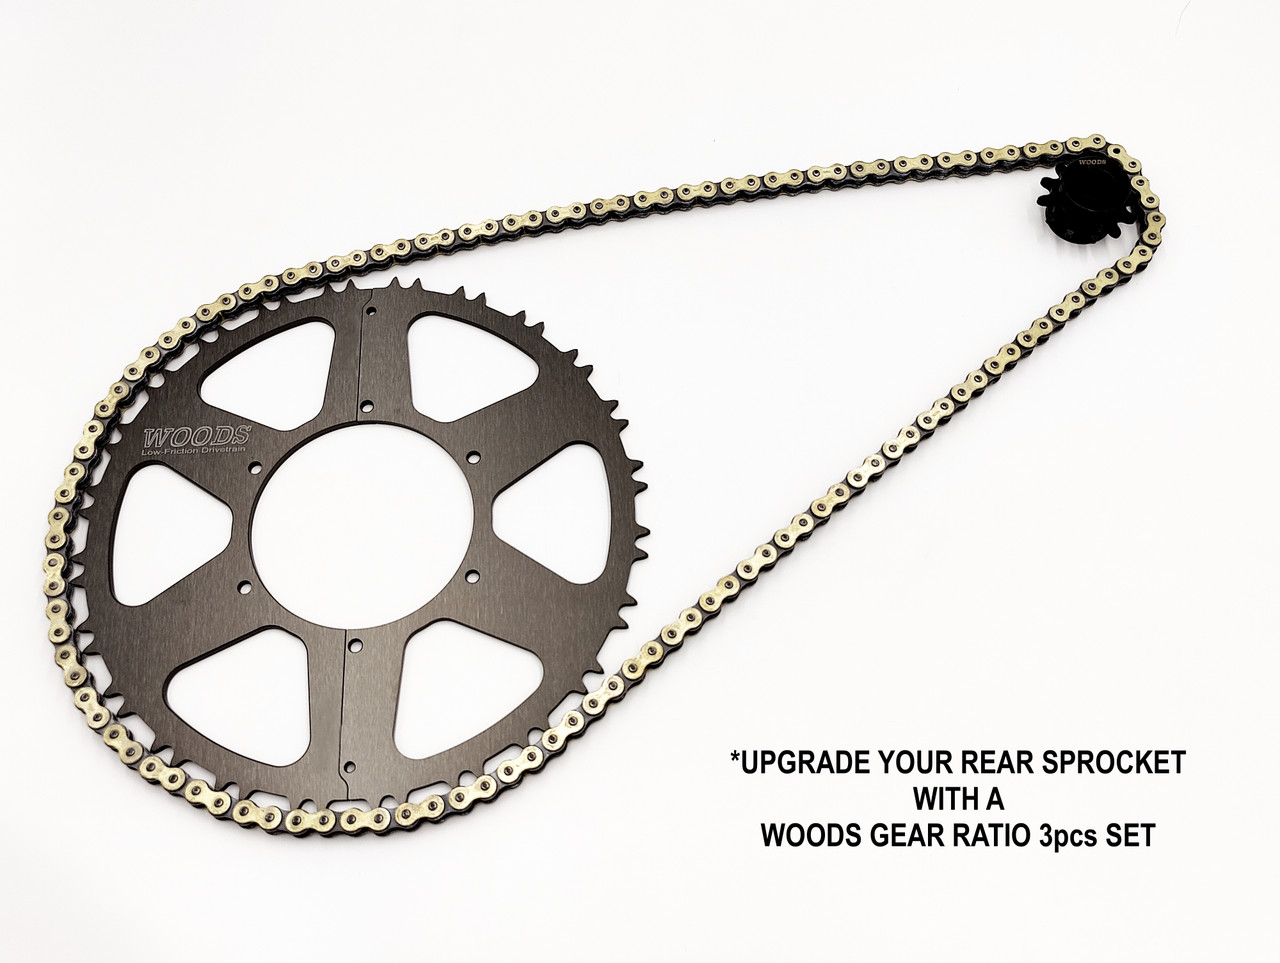 BUY A WOODS RATIO SET AND SAVE $$ (415 CHAIN SIZE)